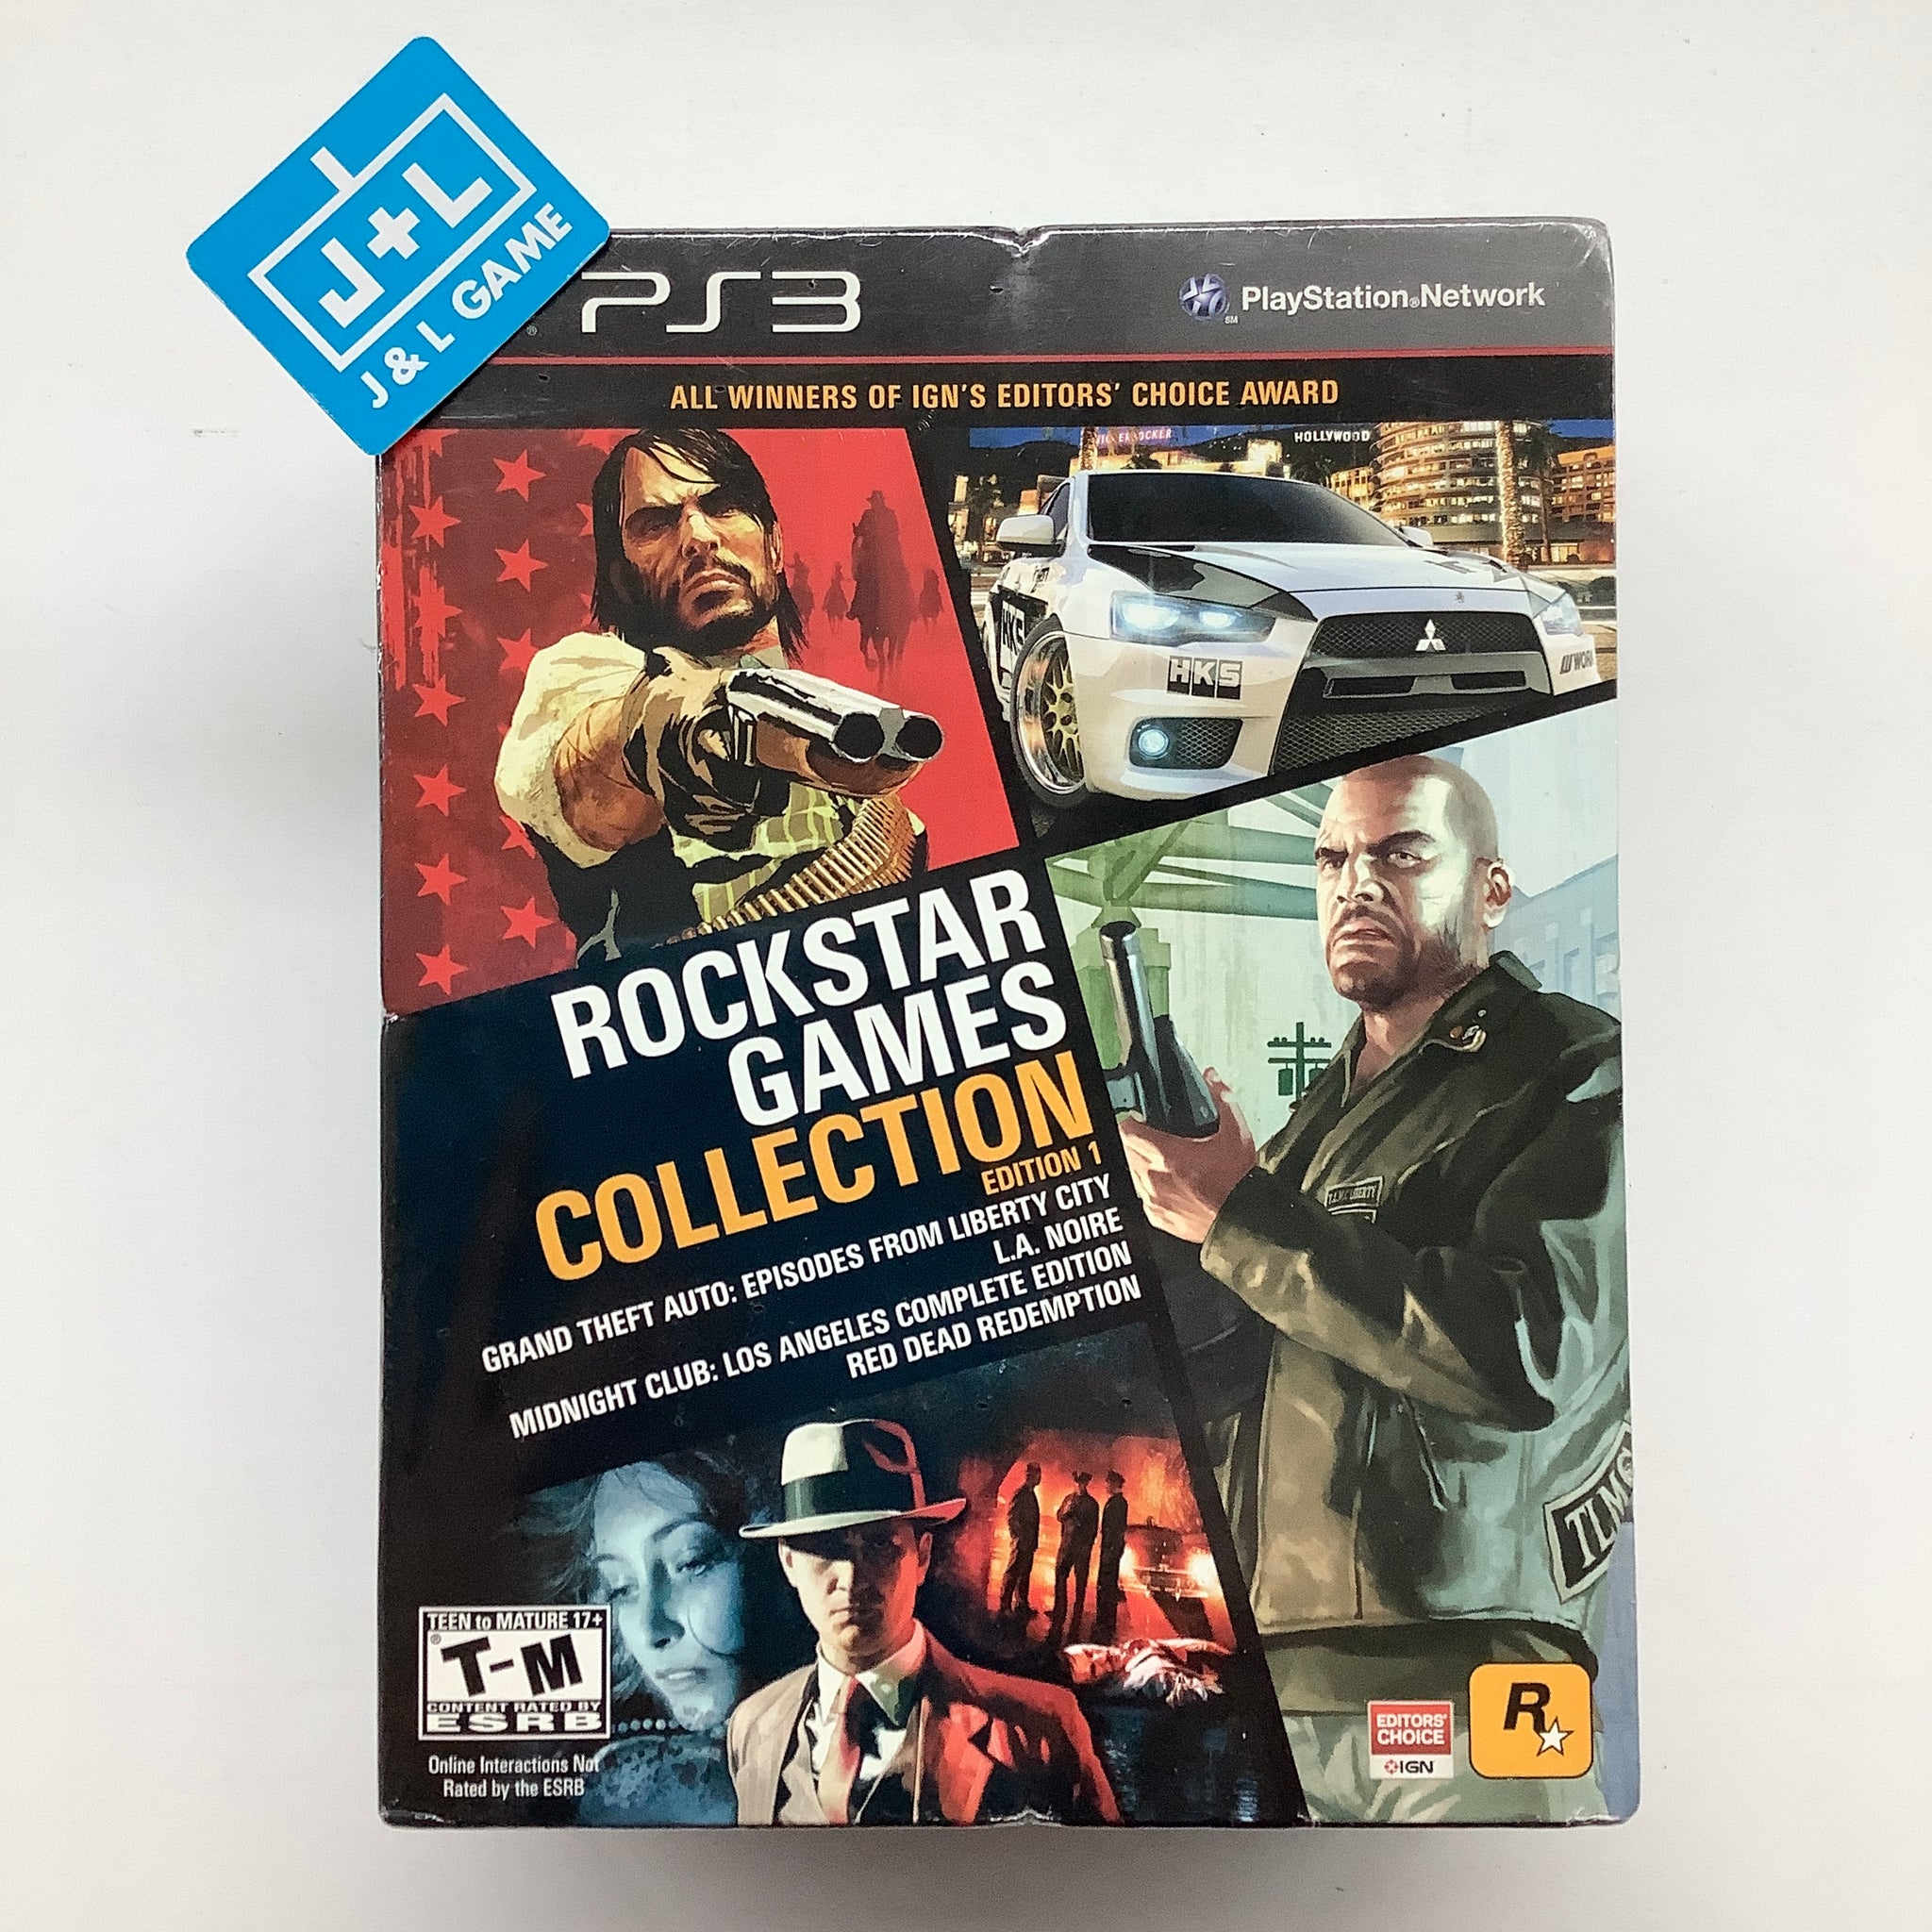 Rockstar Games Collection: Edition 1 - IGN